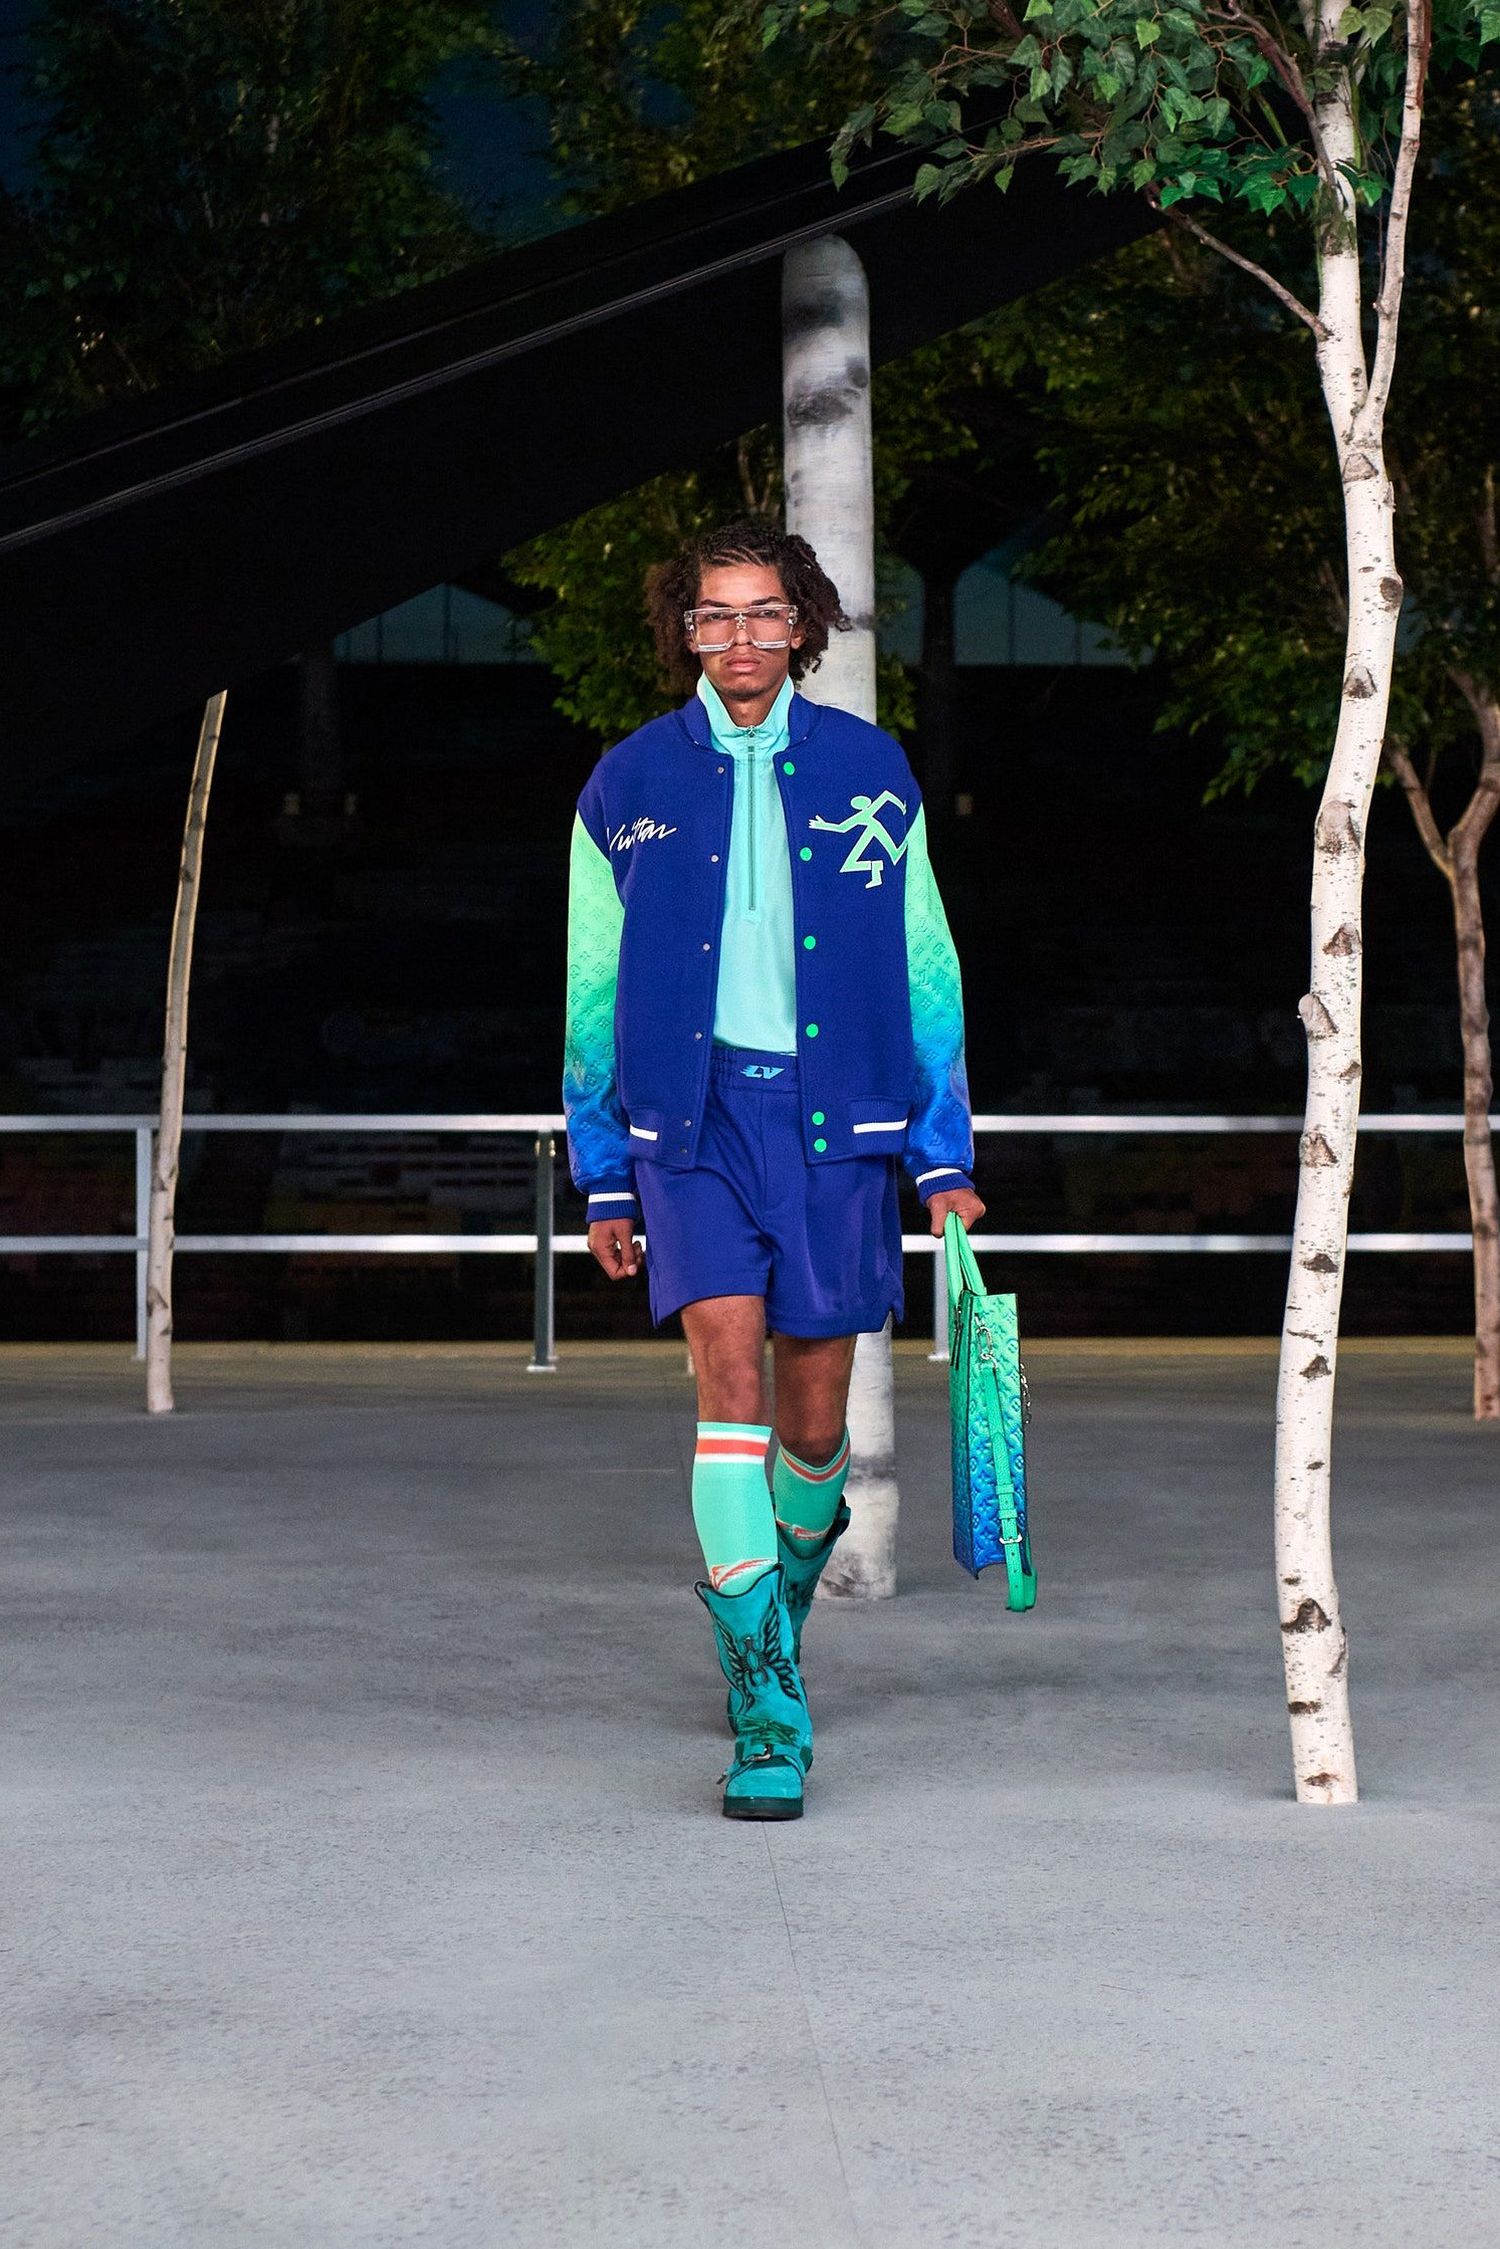 Why Virgil Abloh's appointment at Louis Vuitton proves the winds